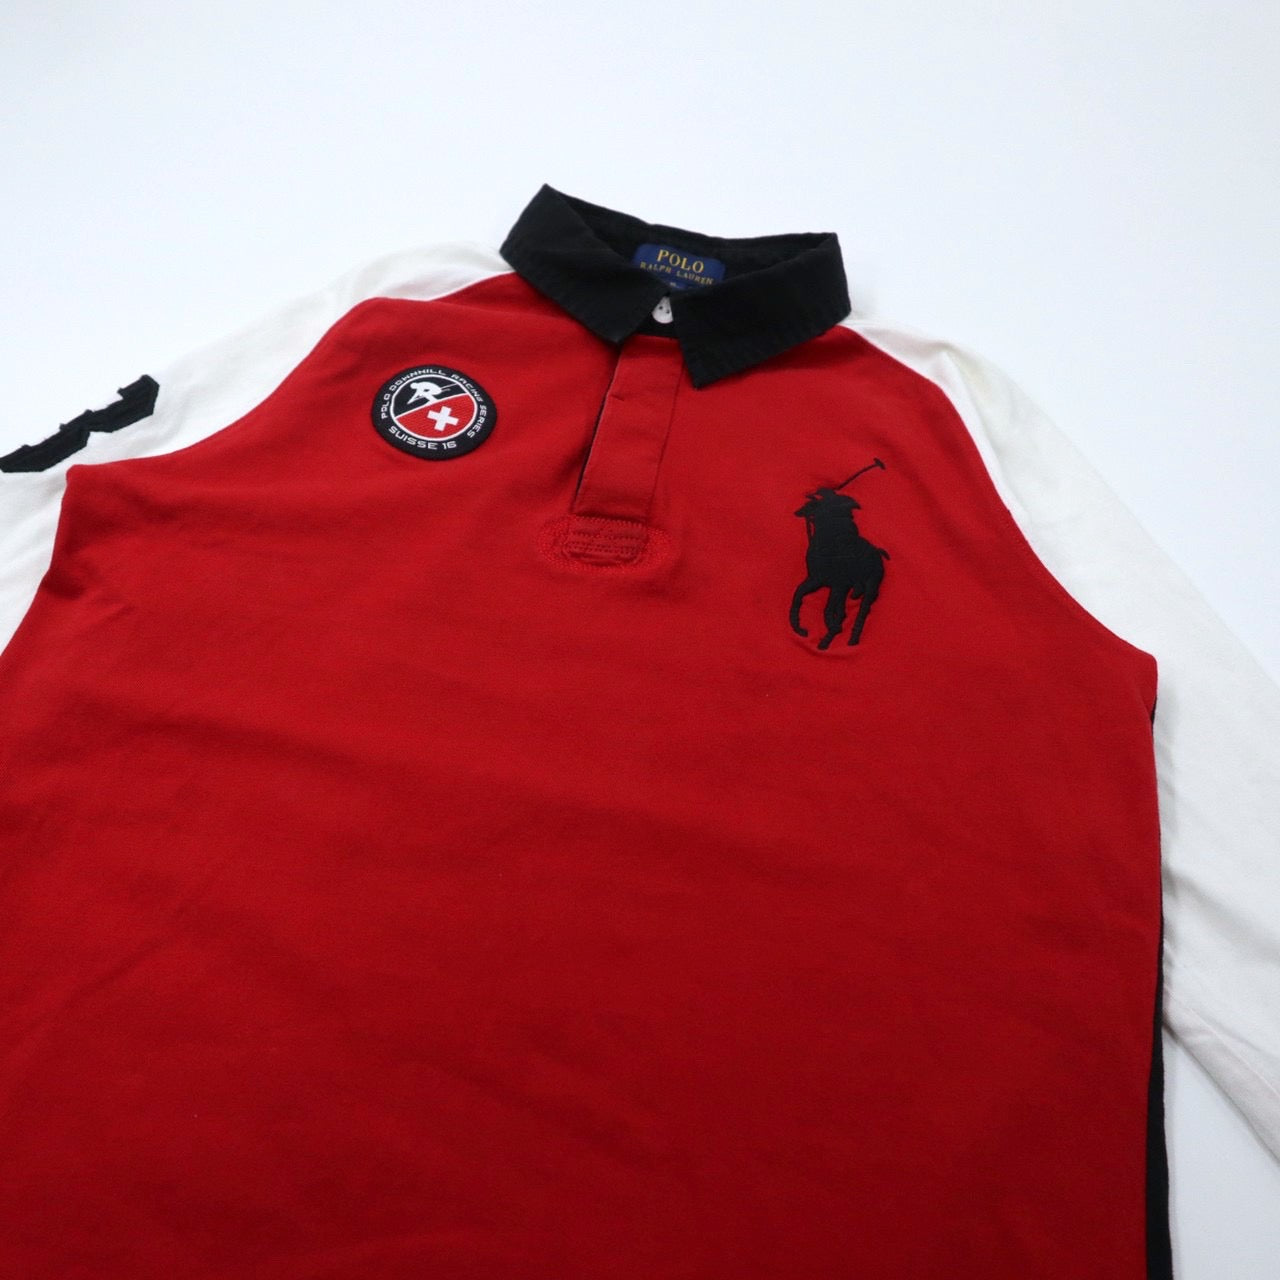 POLO RALPH LAUREN RUGBY SHIRT XL Red Cotton Big Pony Embroidery 